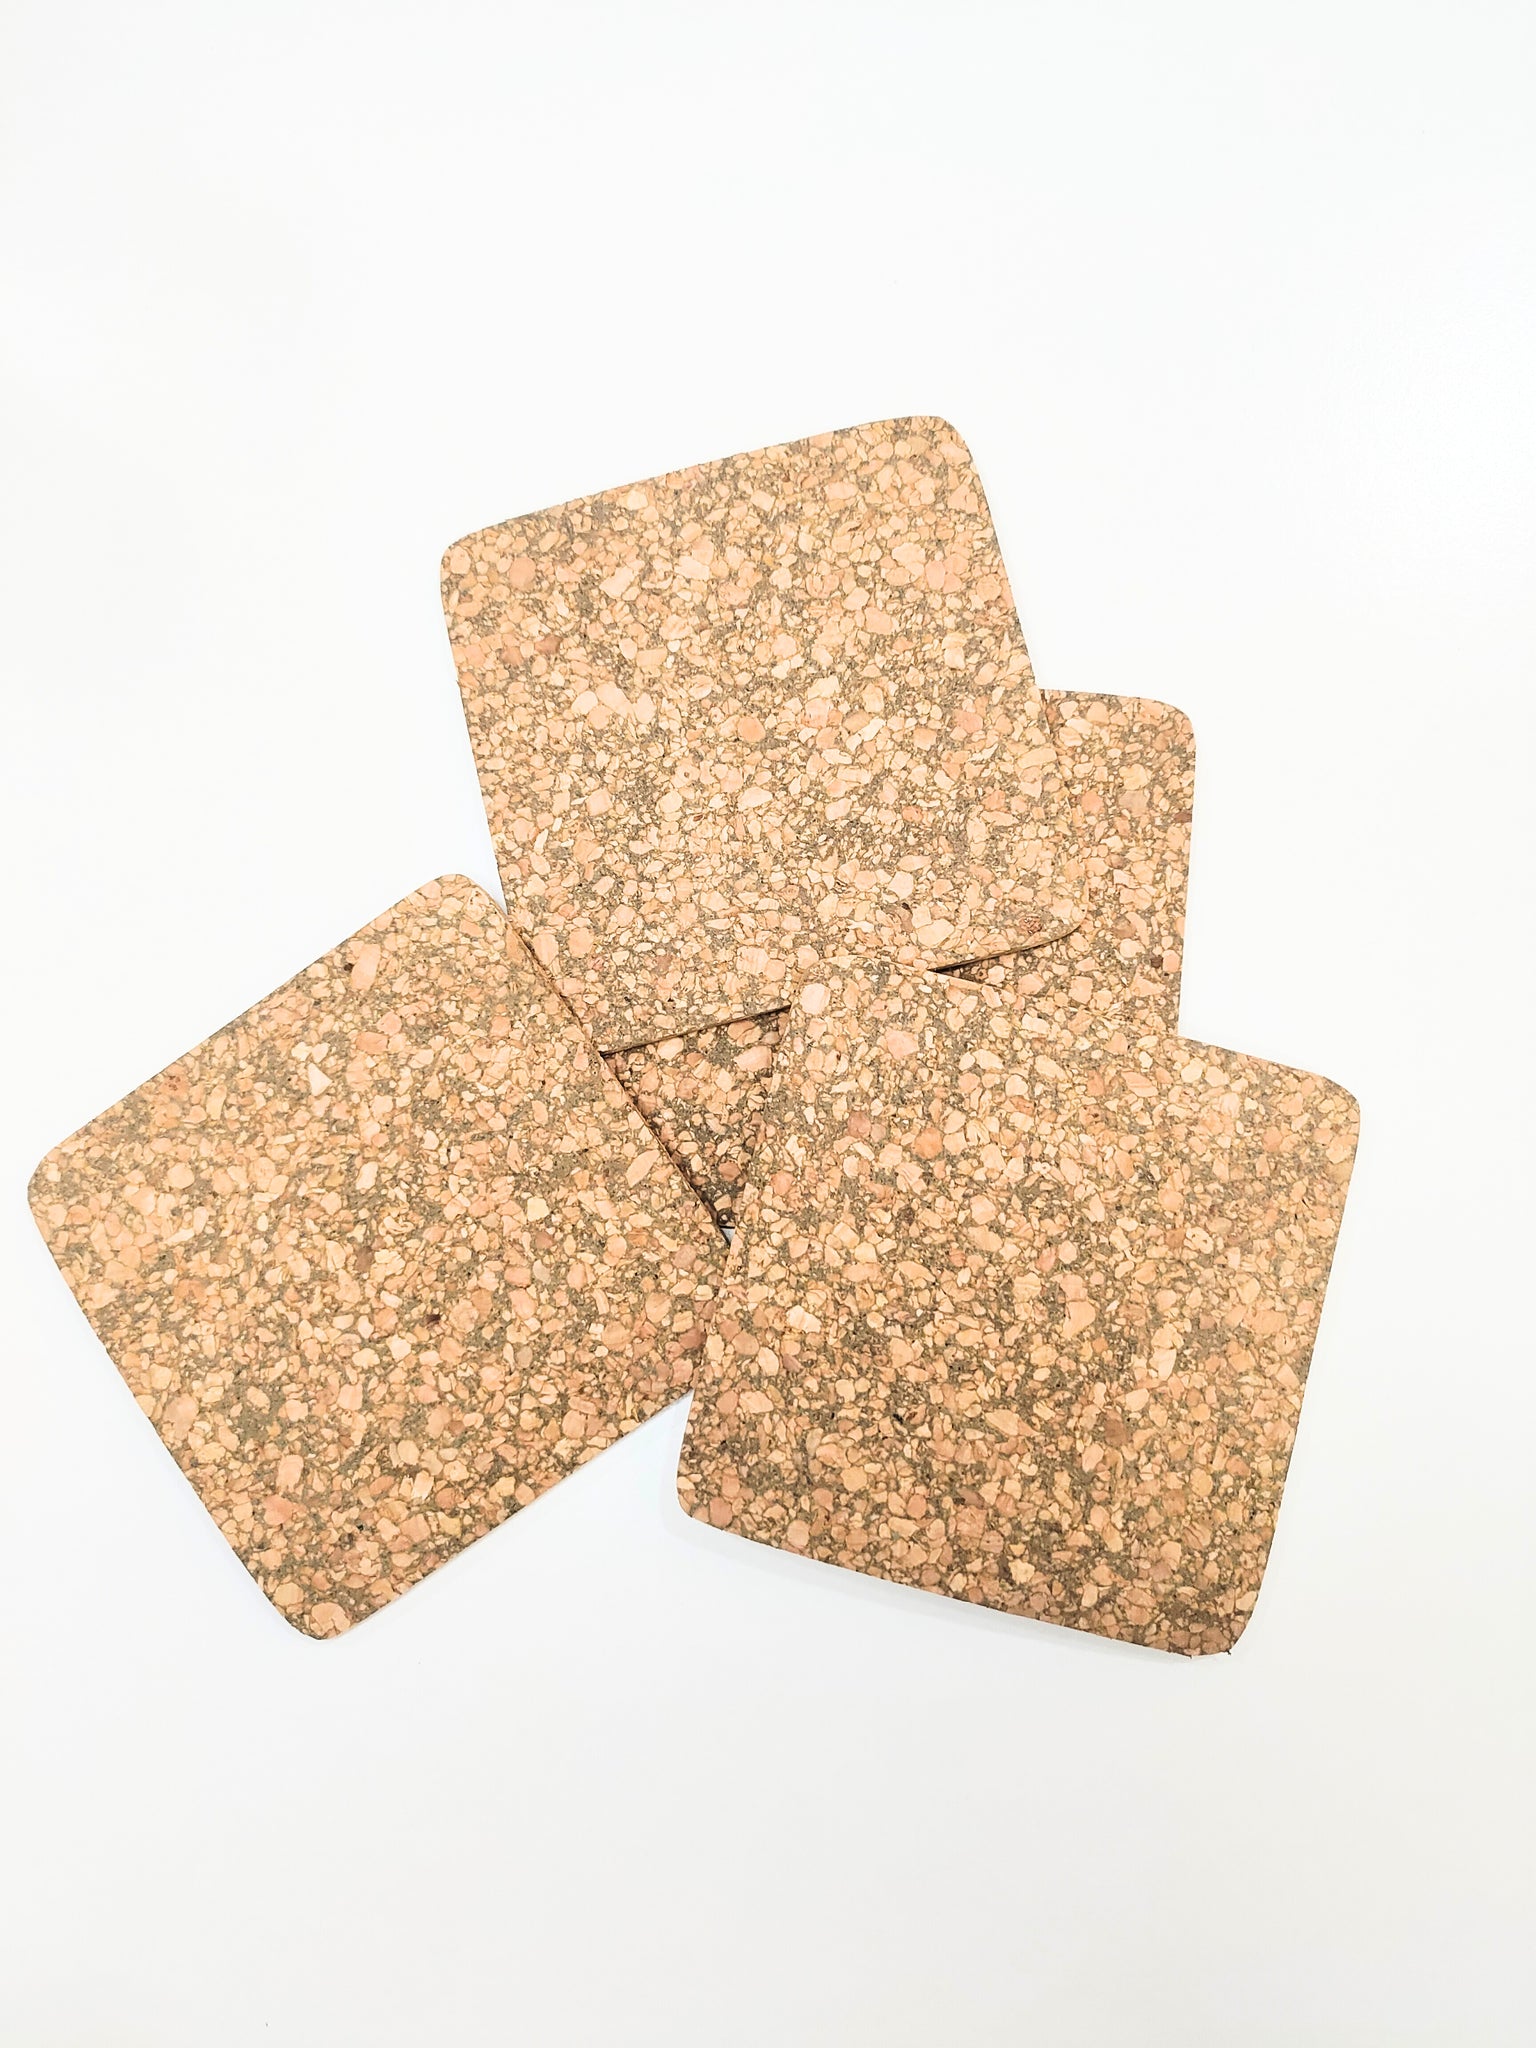 NATURAL CORK COASTERS HANDCRAFTED SET OF 4 CUSTOMIZED GIFT